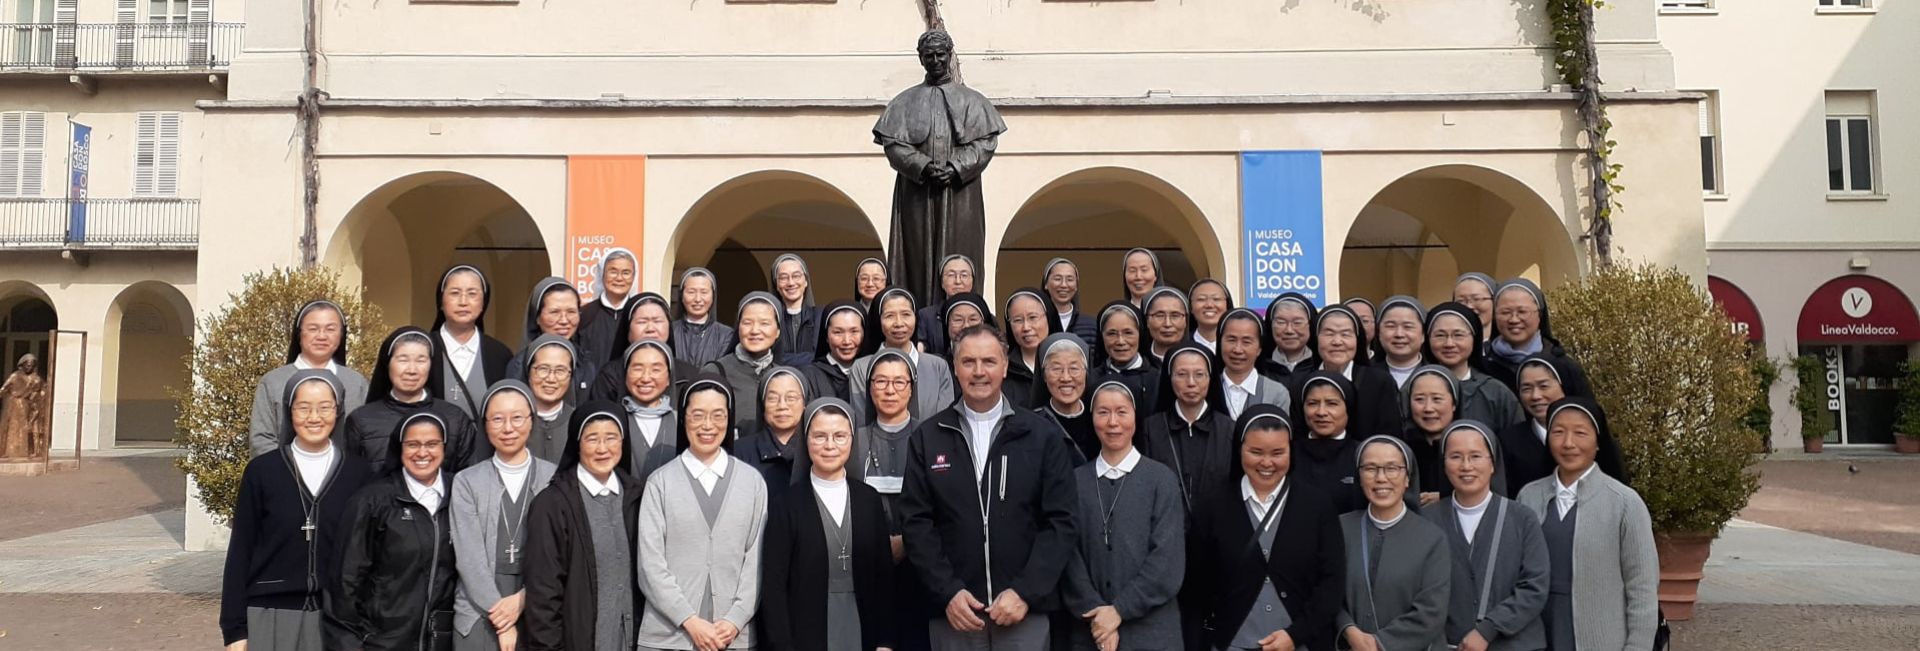 The Sisters of Charity and "Pastoral Charity"